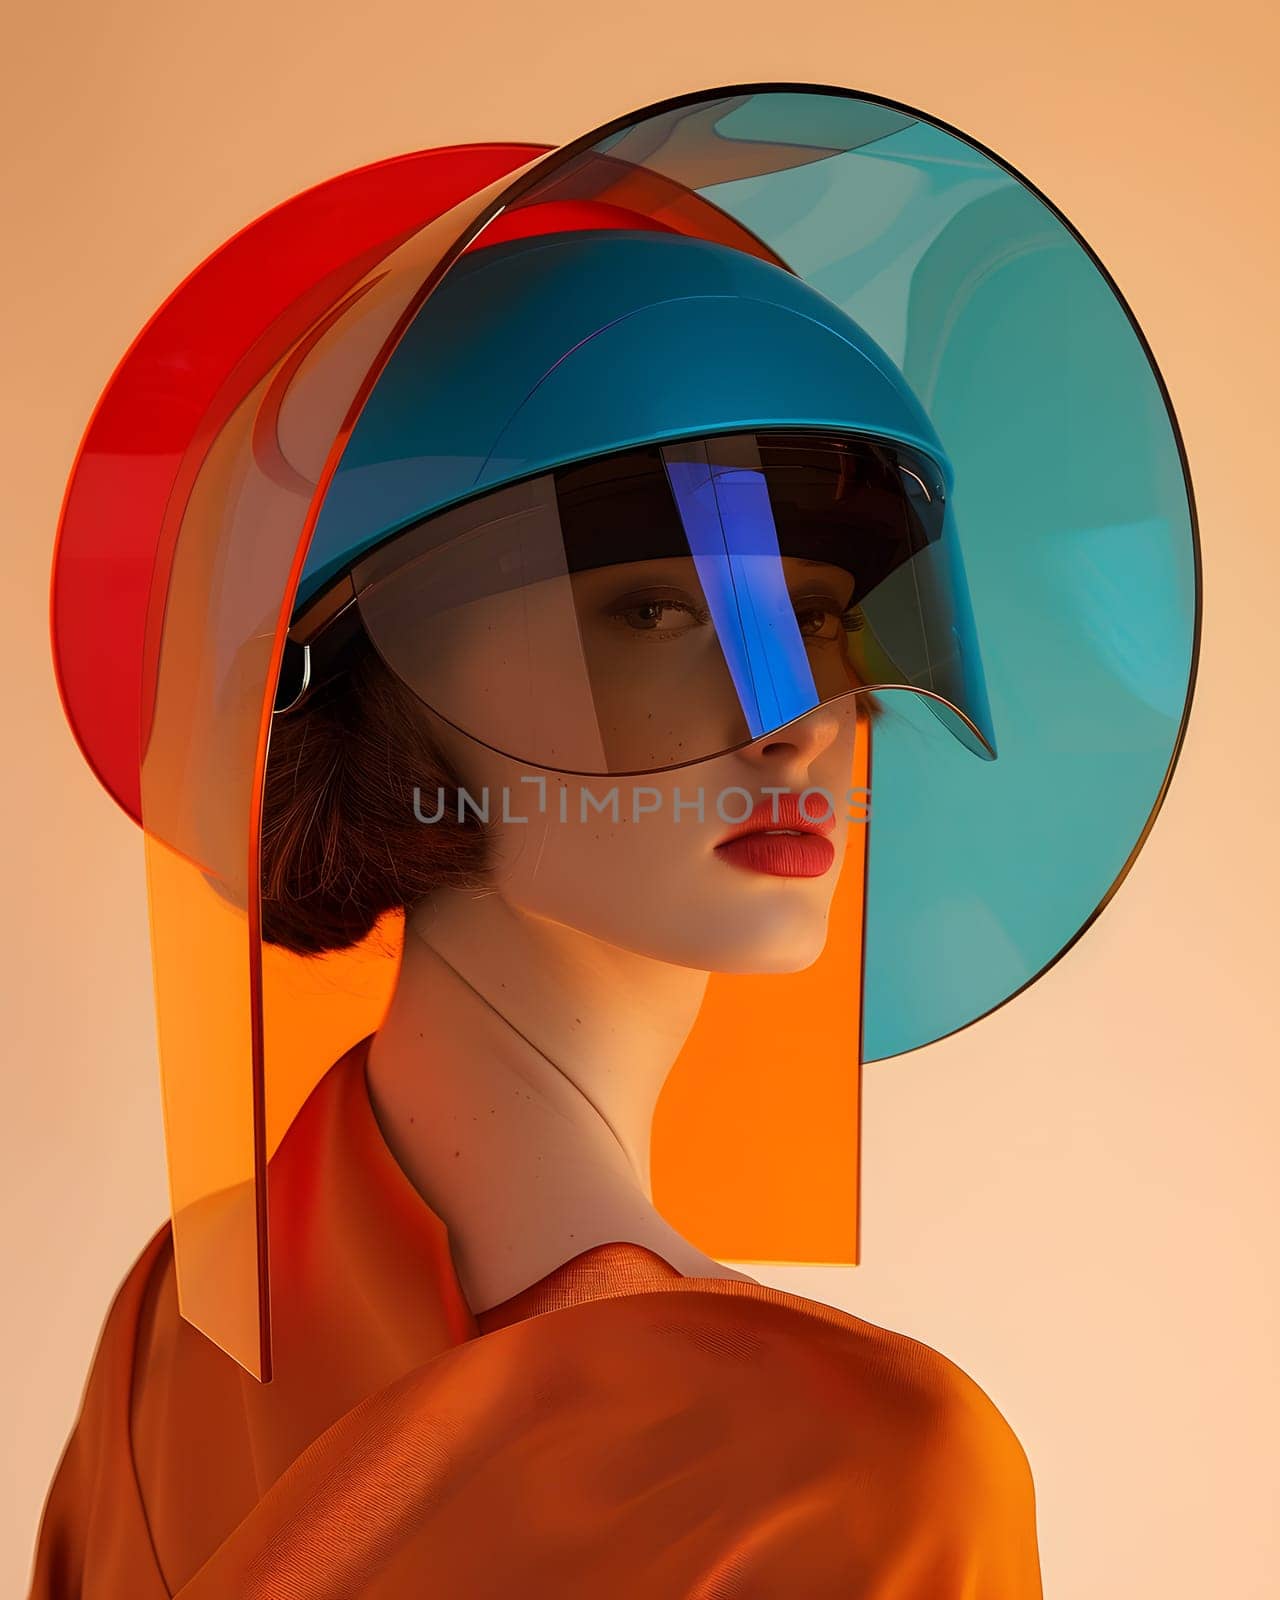 a woman wearing a colorful hat and sunglasses by Nadtochiy